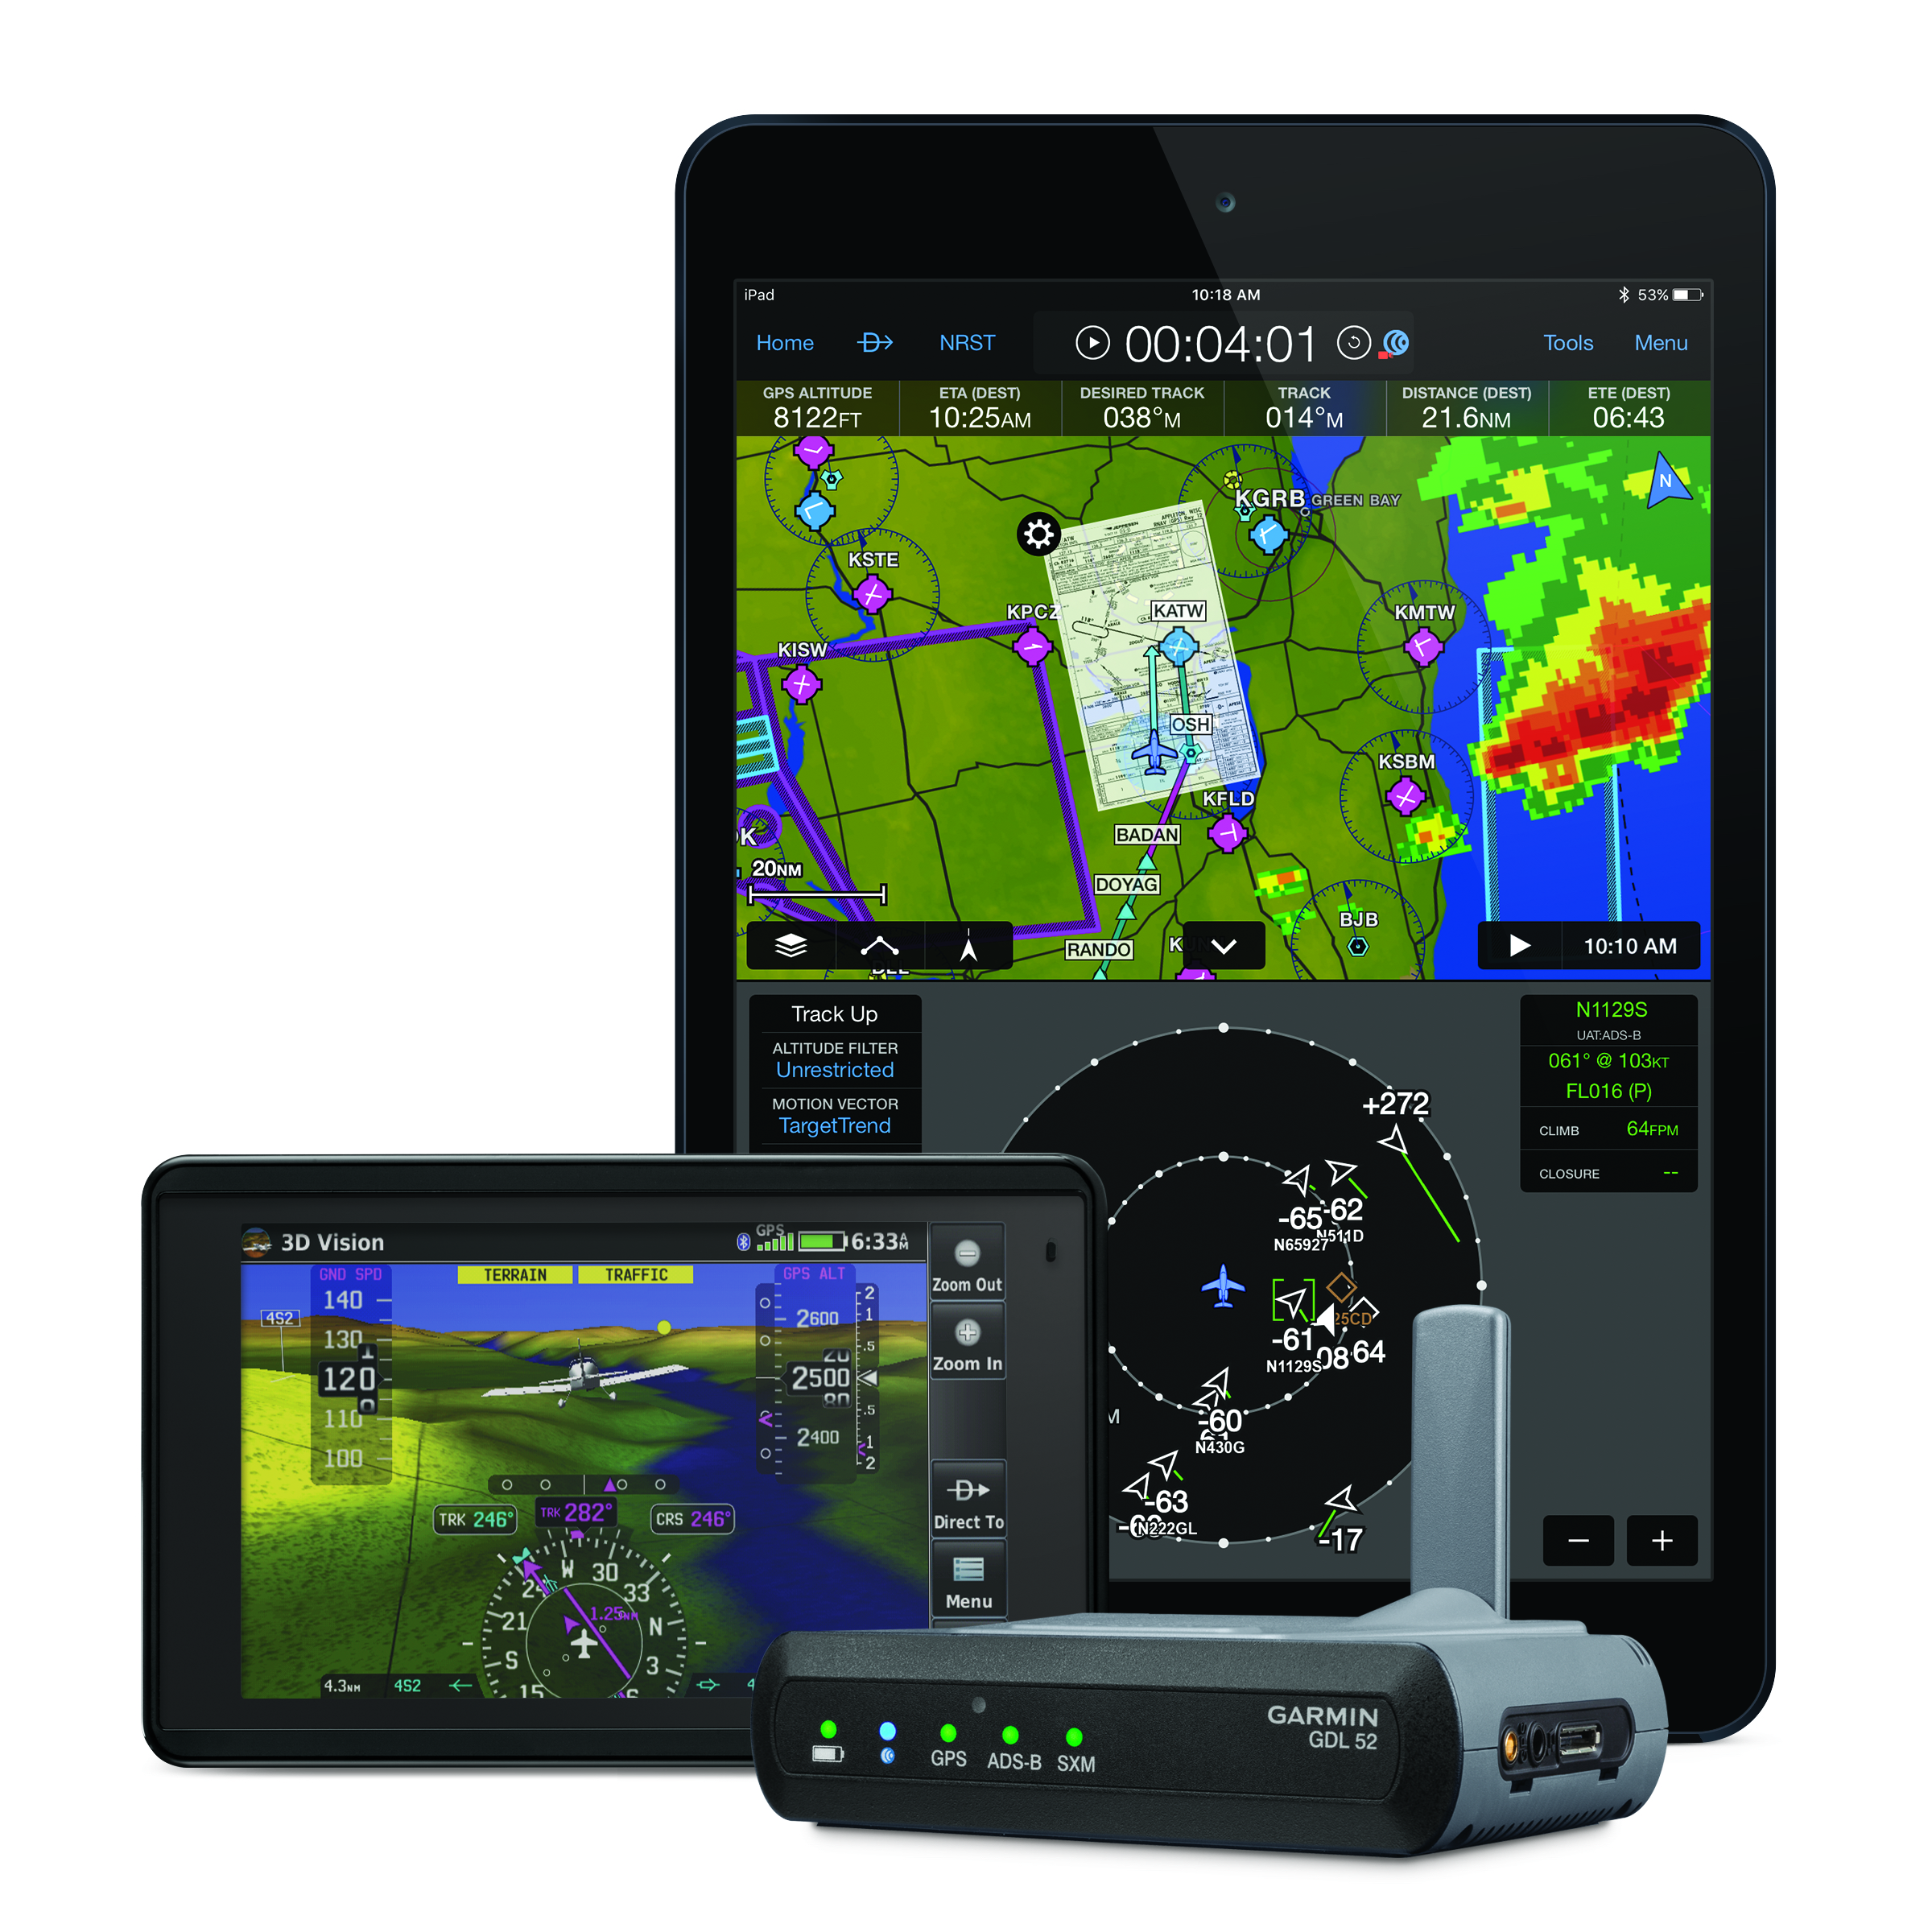 Capable of wirelessly streaming data to two devices and making hardwired connections to two additional devices simultaneously, the GDL 52 offers quick and convenient access to essential information throughout the cockpit.